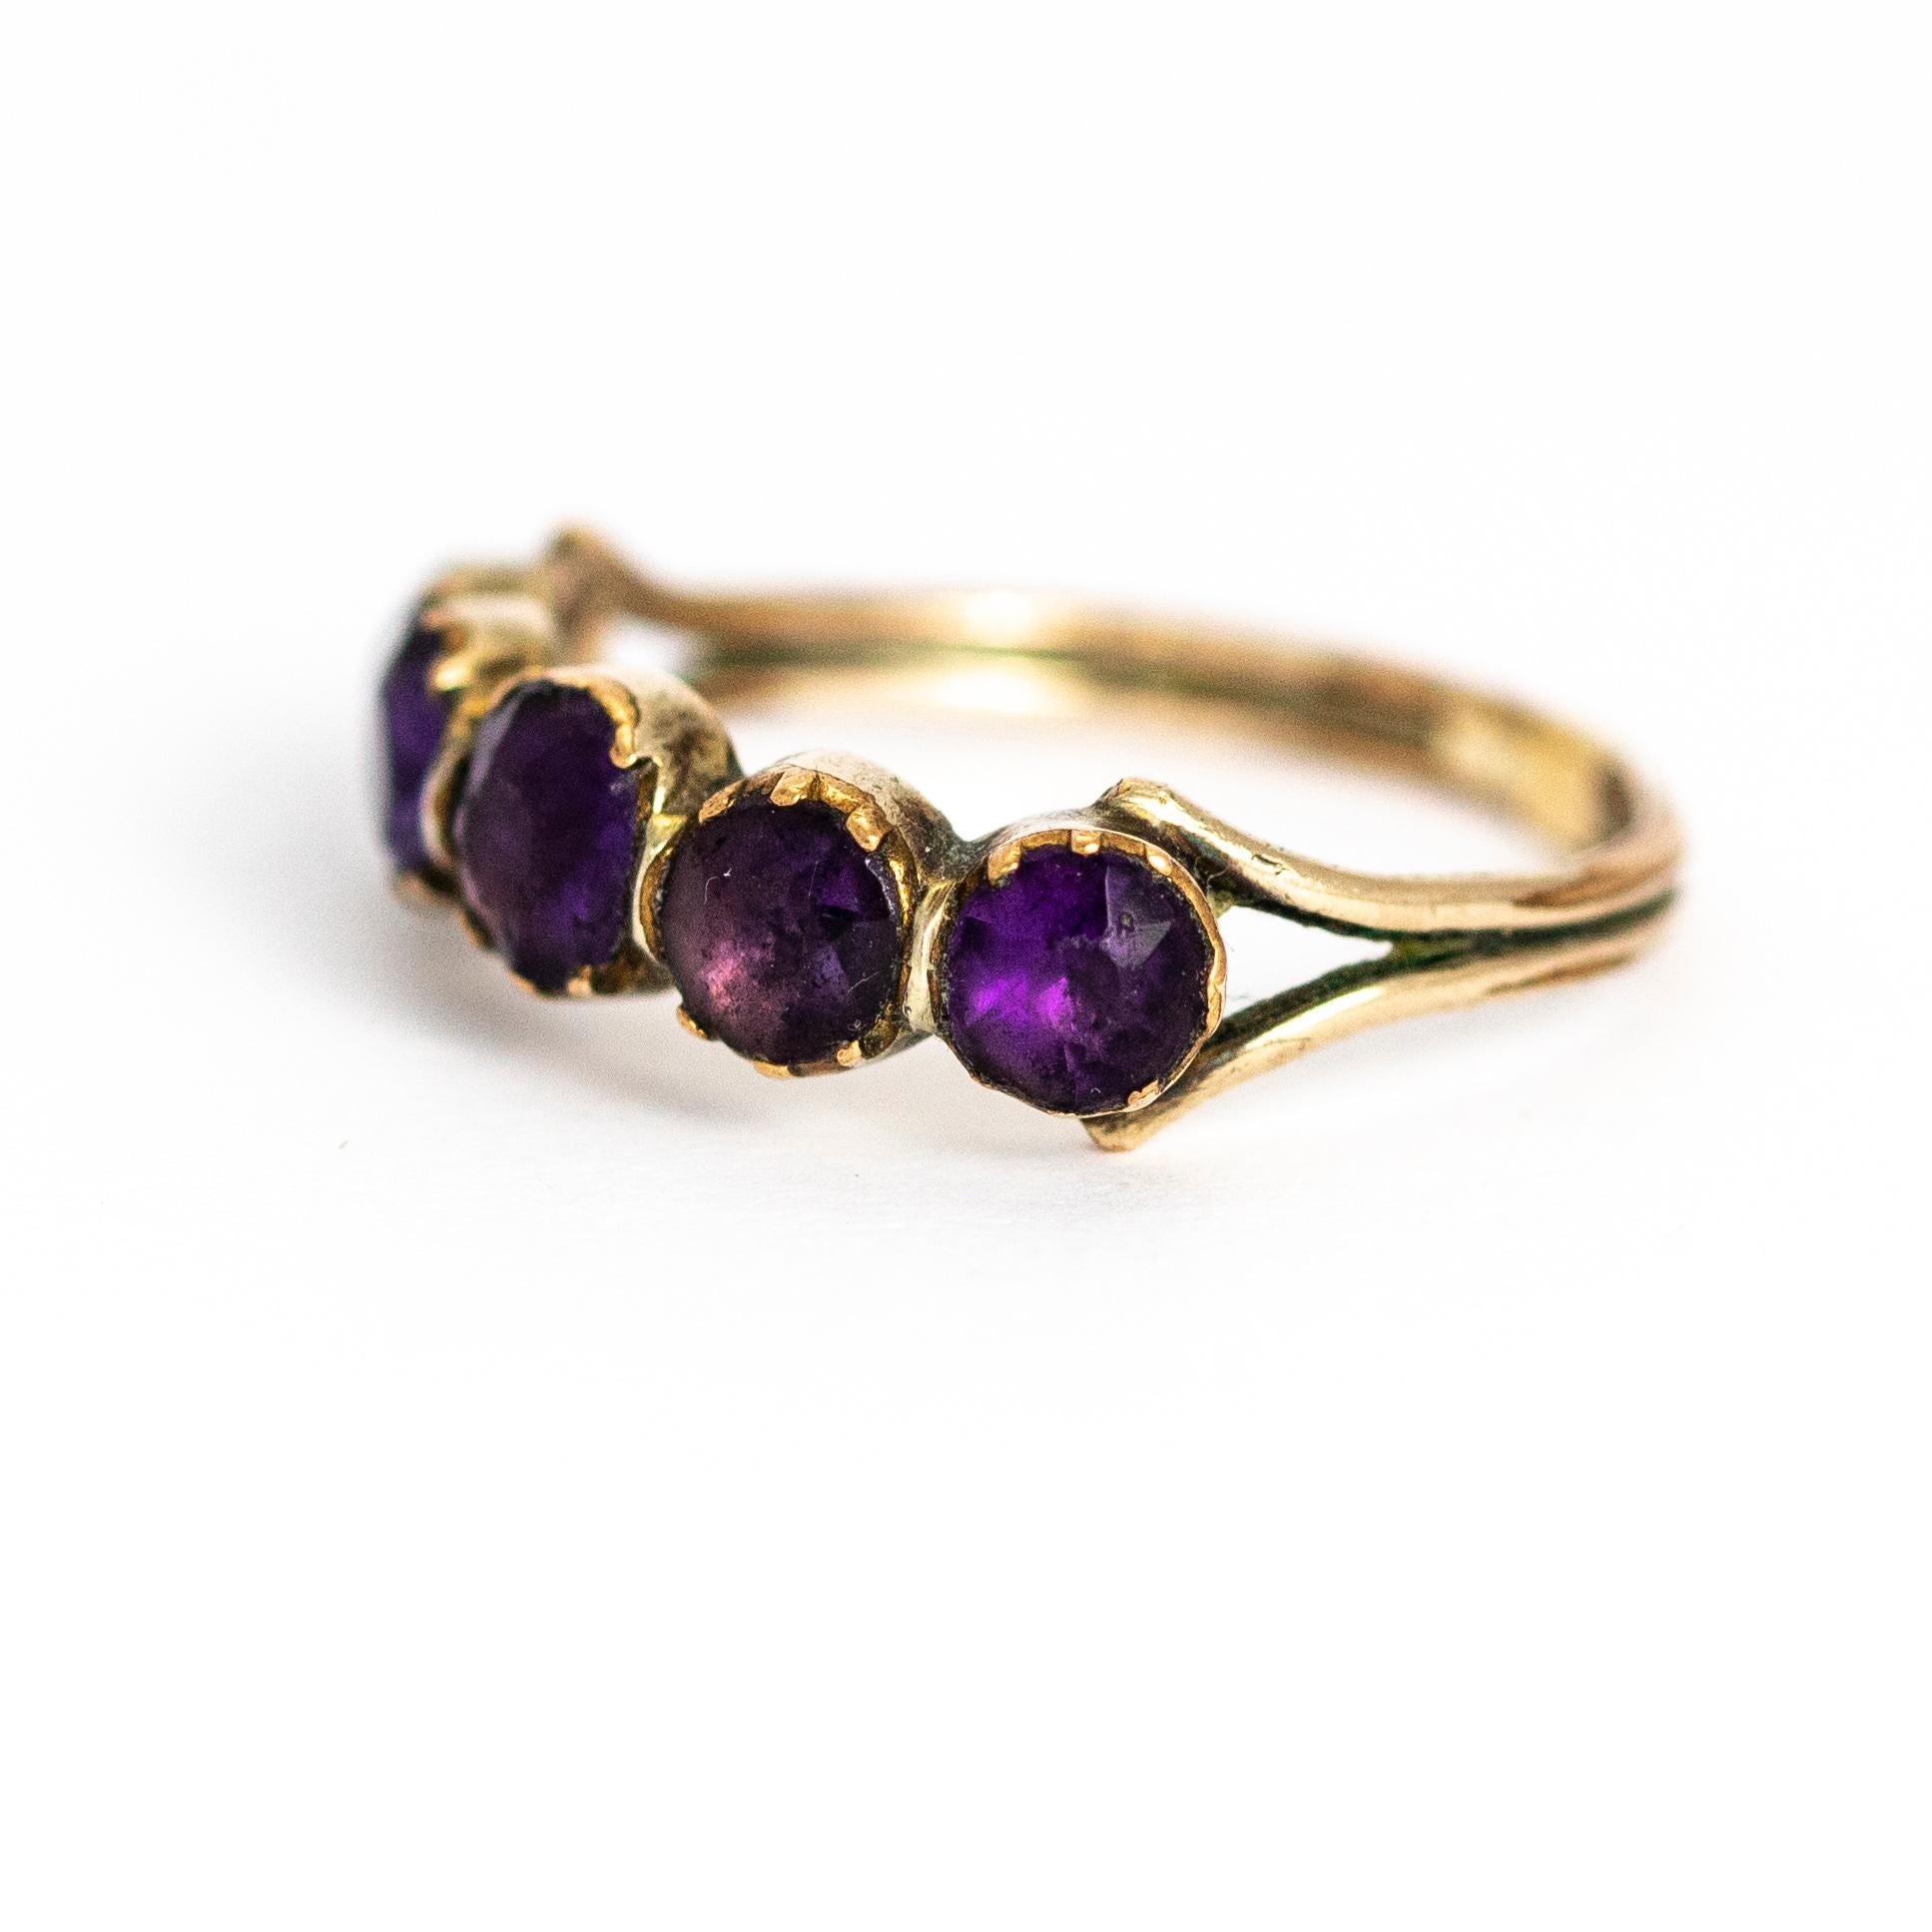 A spectacular antique Georgian five-stone ring set with beautiful deep purple round-cut amethysts. Modelled in 9 karat yellow gold.

Ring Size: UK M 1/2, US 6 1/3